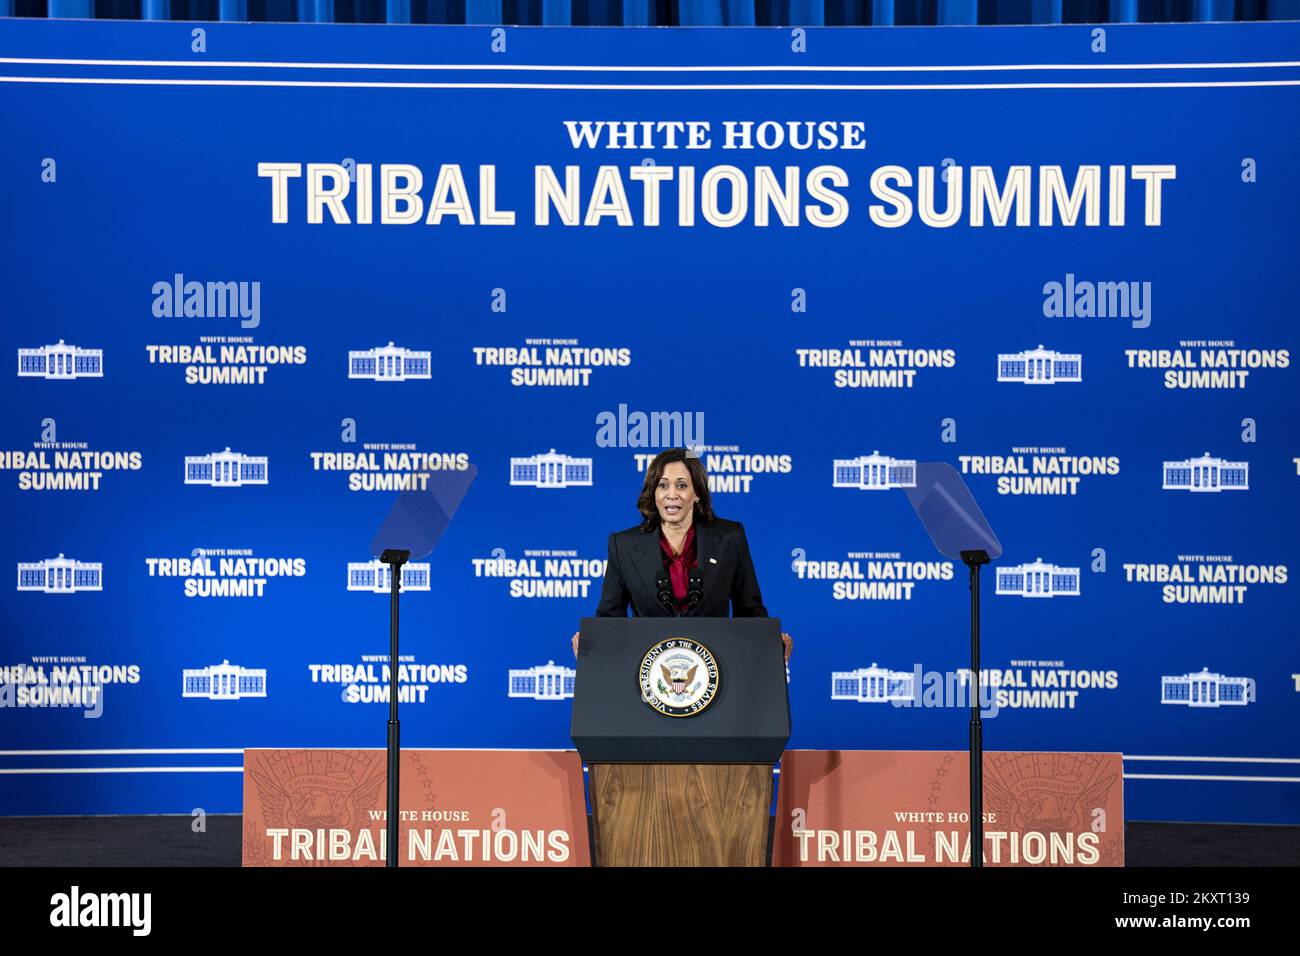 Washington, United States. 30th Nov, 2022. Vice President Kamala Harris speaks at the White House Tribal Nations Summit at the Department of the Interior in Washington, DC, on Wednesday, November 30, 2022. The summit is allowing federal officials and Tribal leaders to engage about ways to invest in and strengthen Native communities, according to the White House. Photo by Al Drago/UPI Credit: UPI/Alamy Live News Stock Photo